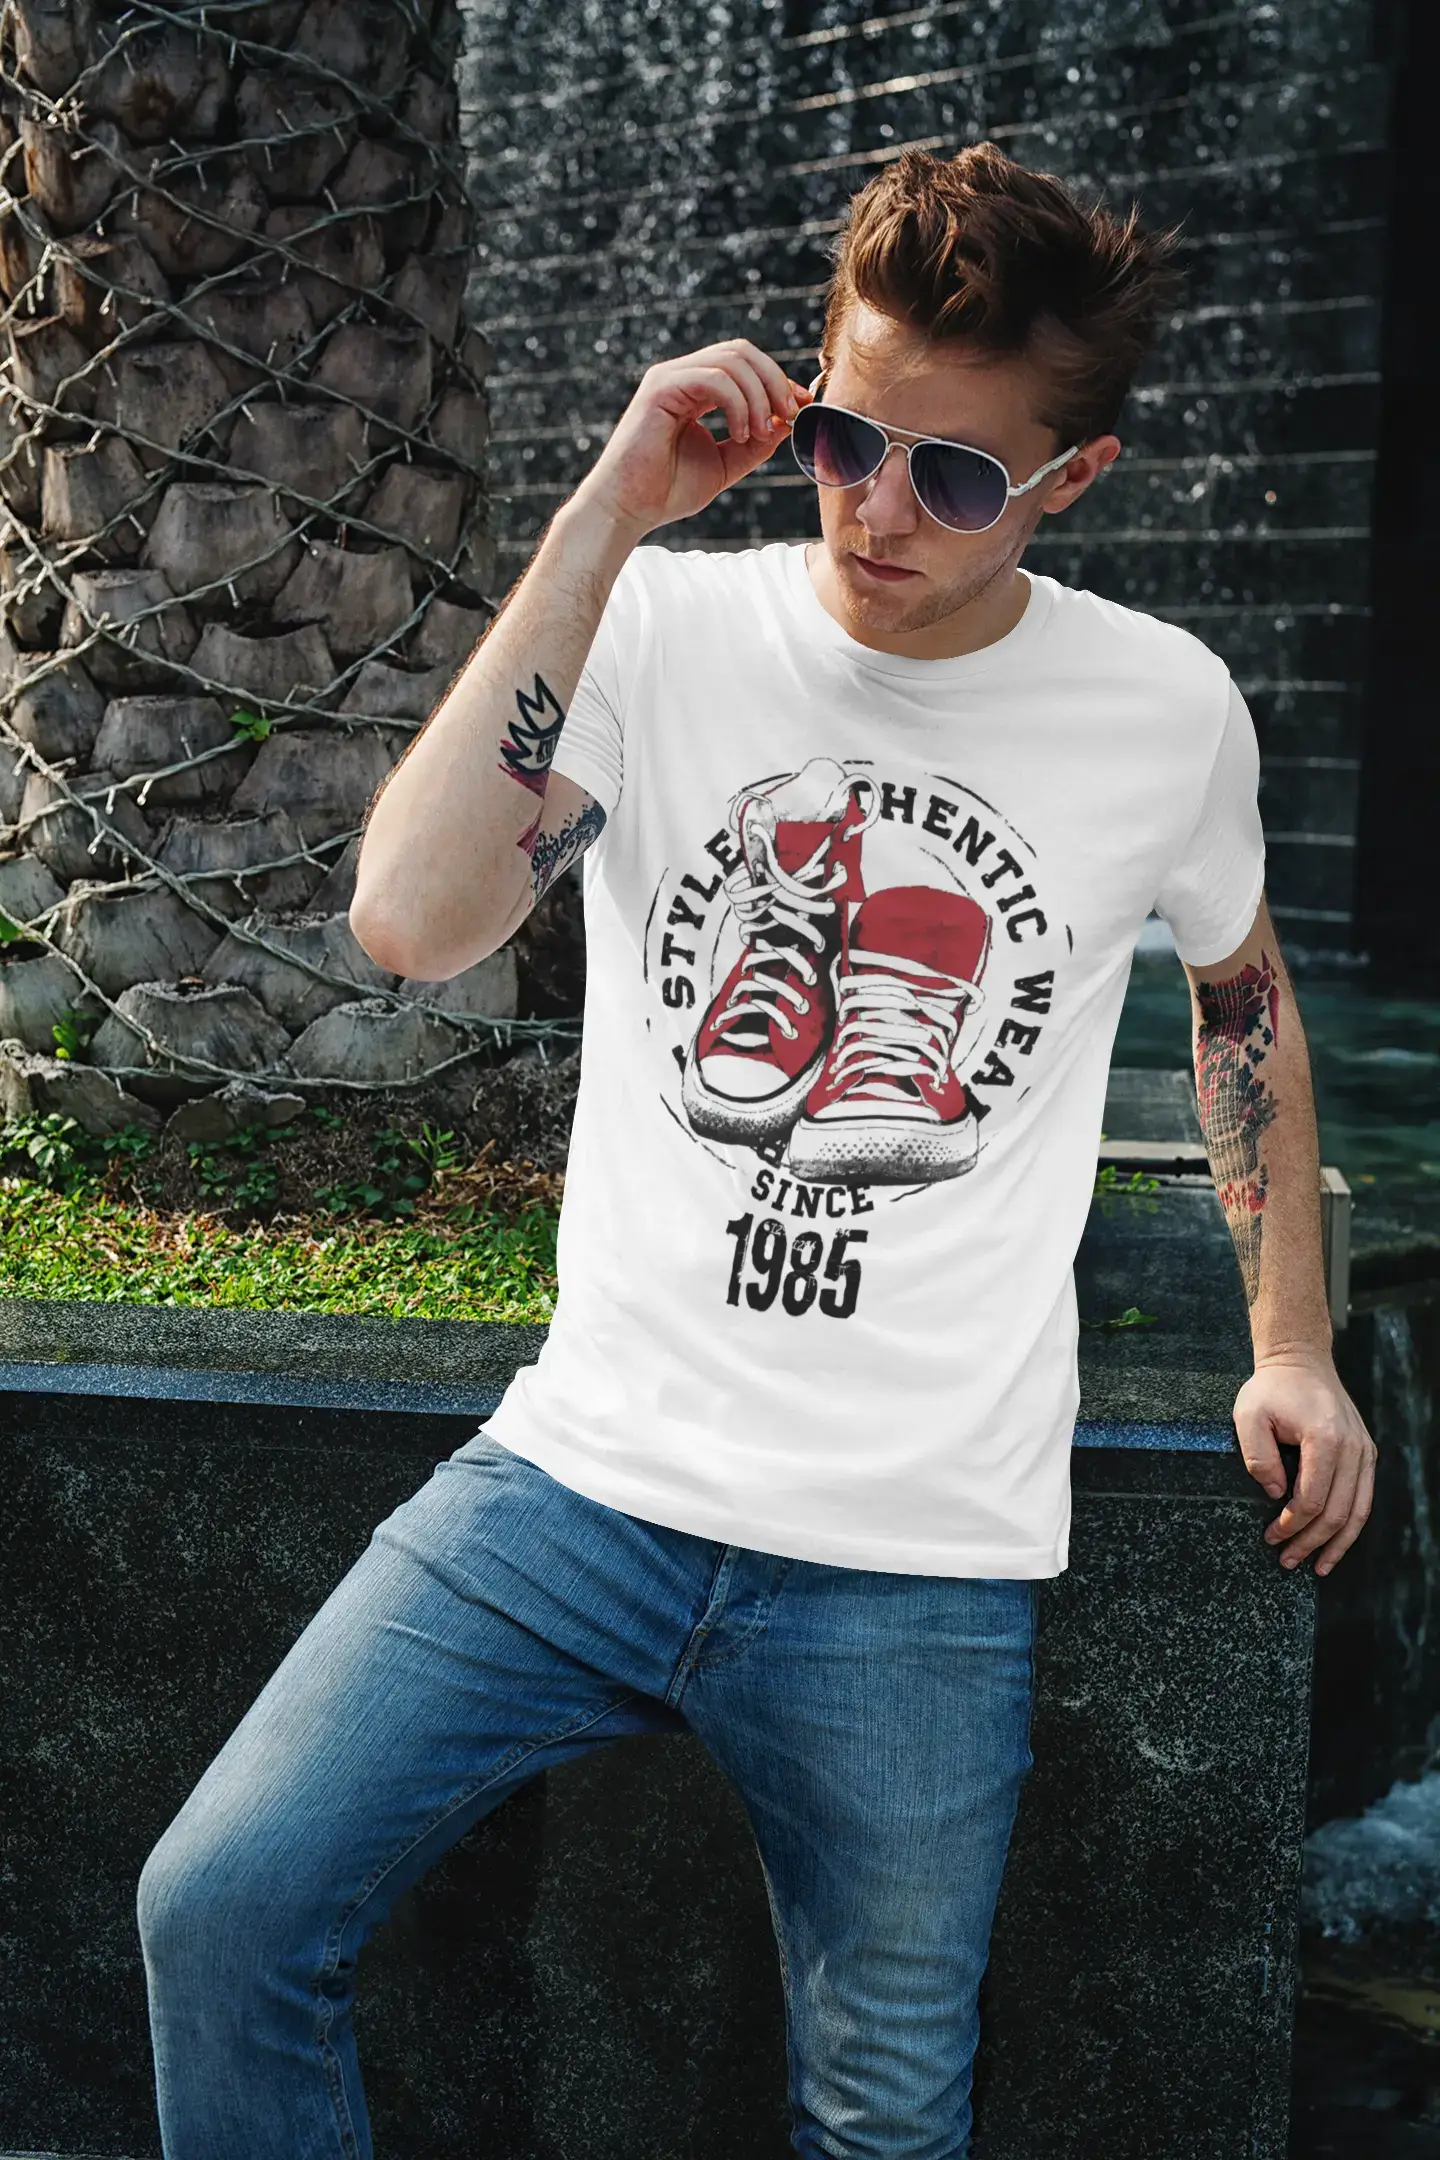 Men's Vintage Tee Shirt Graphic T shirt Authentic Style Since 1985 White Round Neck